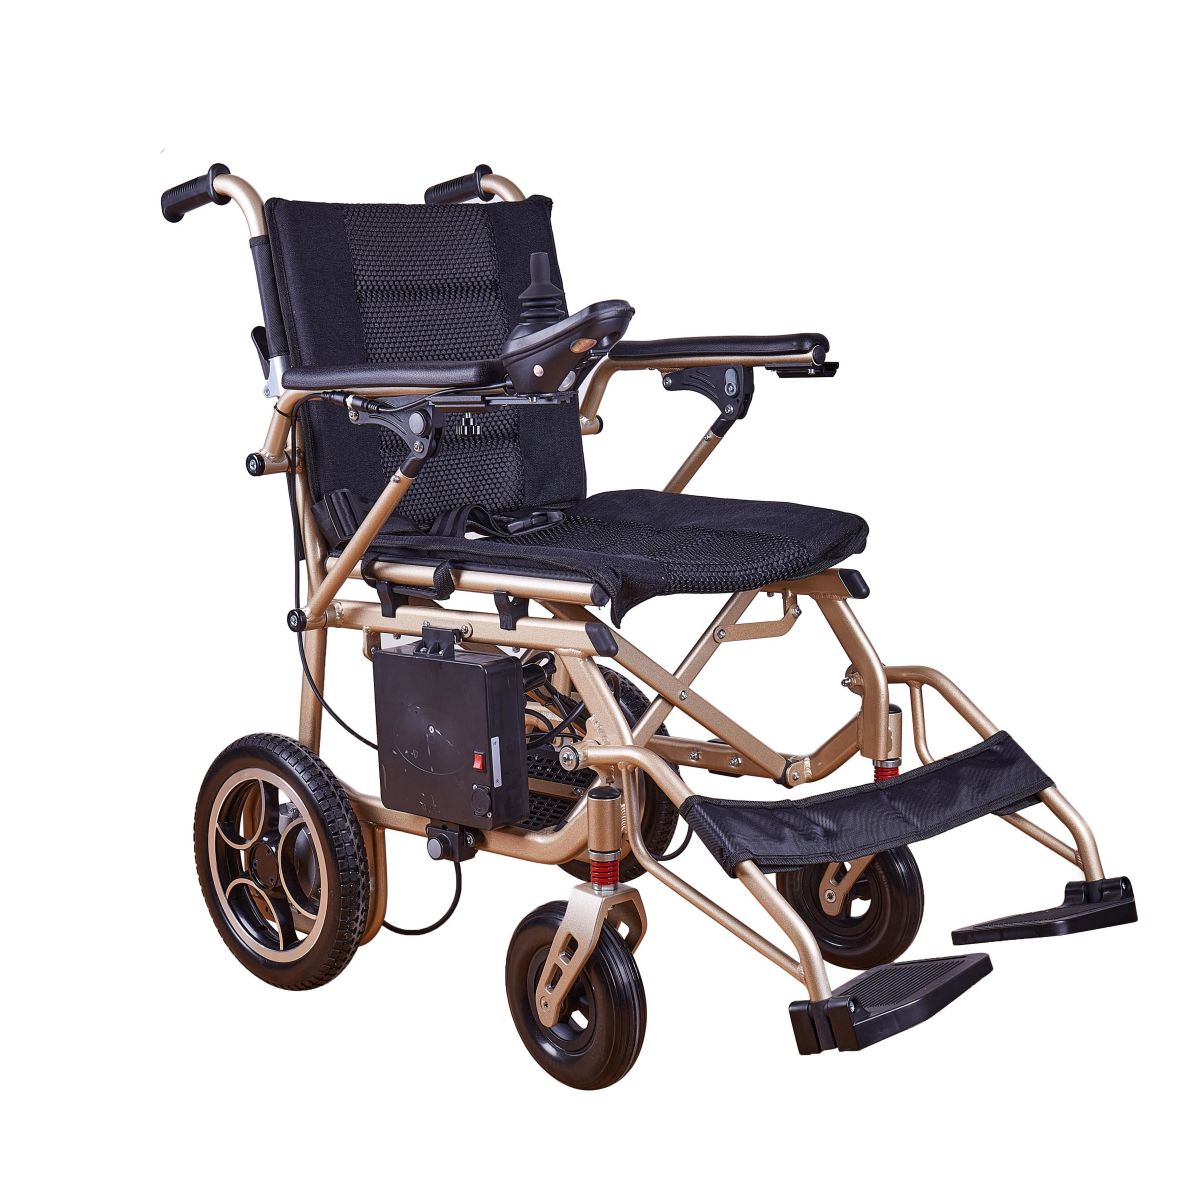 Features of portable electric wheelchair for sale